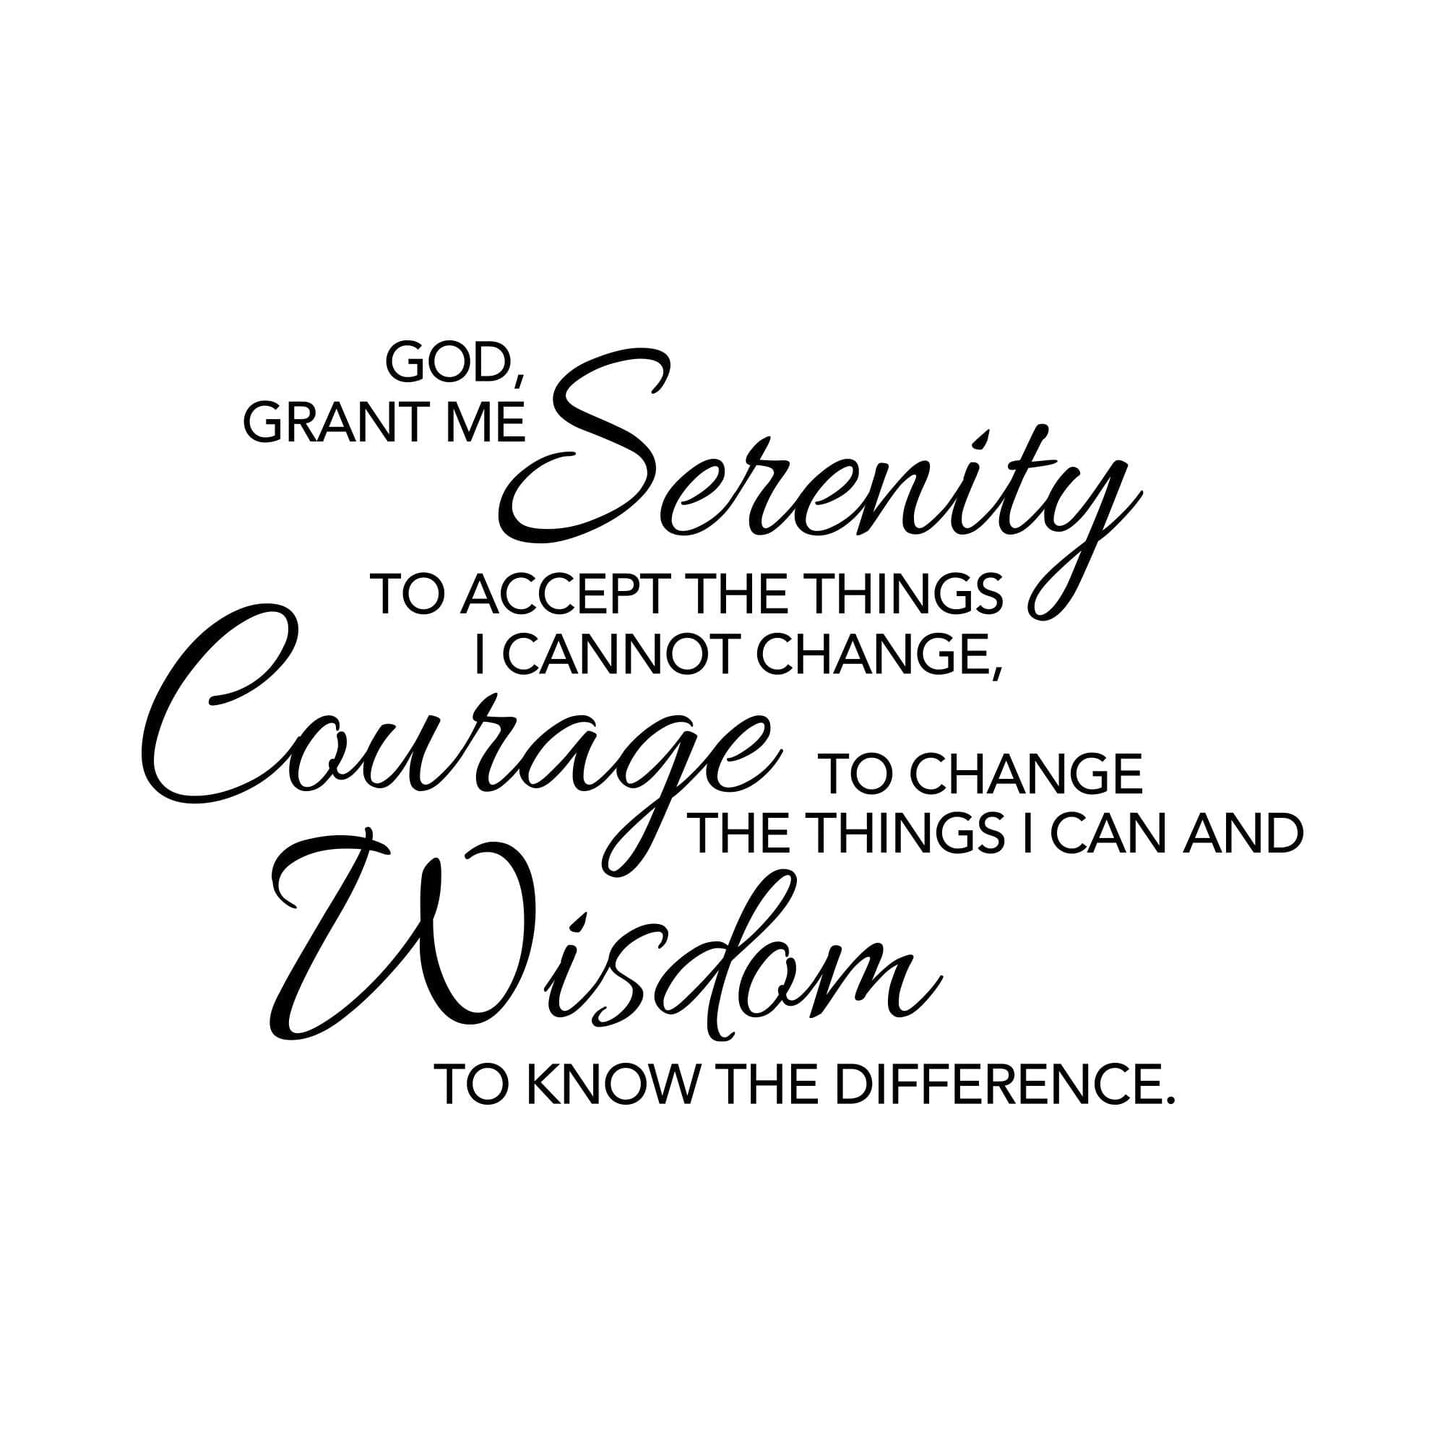 Serenity Prayer Wall Decal Sticker. Dining Room Wall Quote. #6789